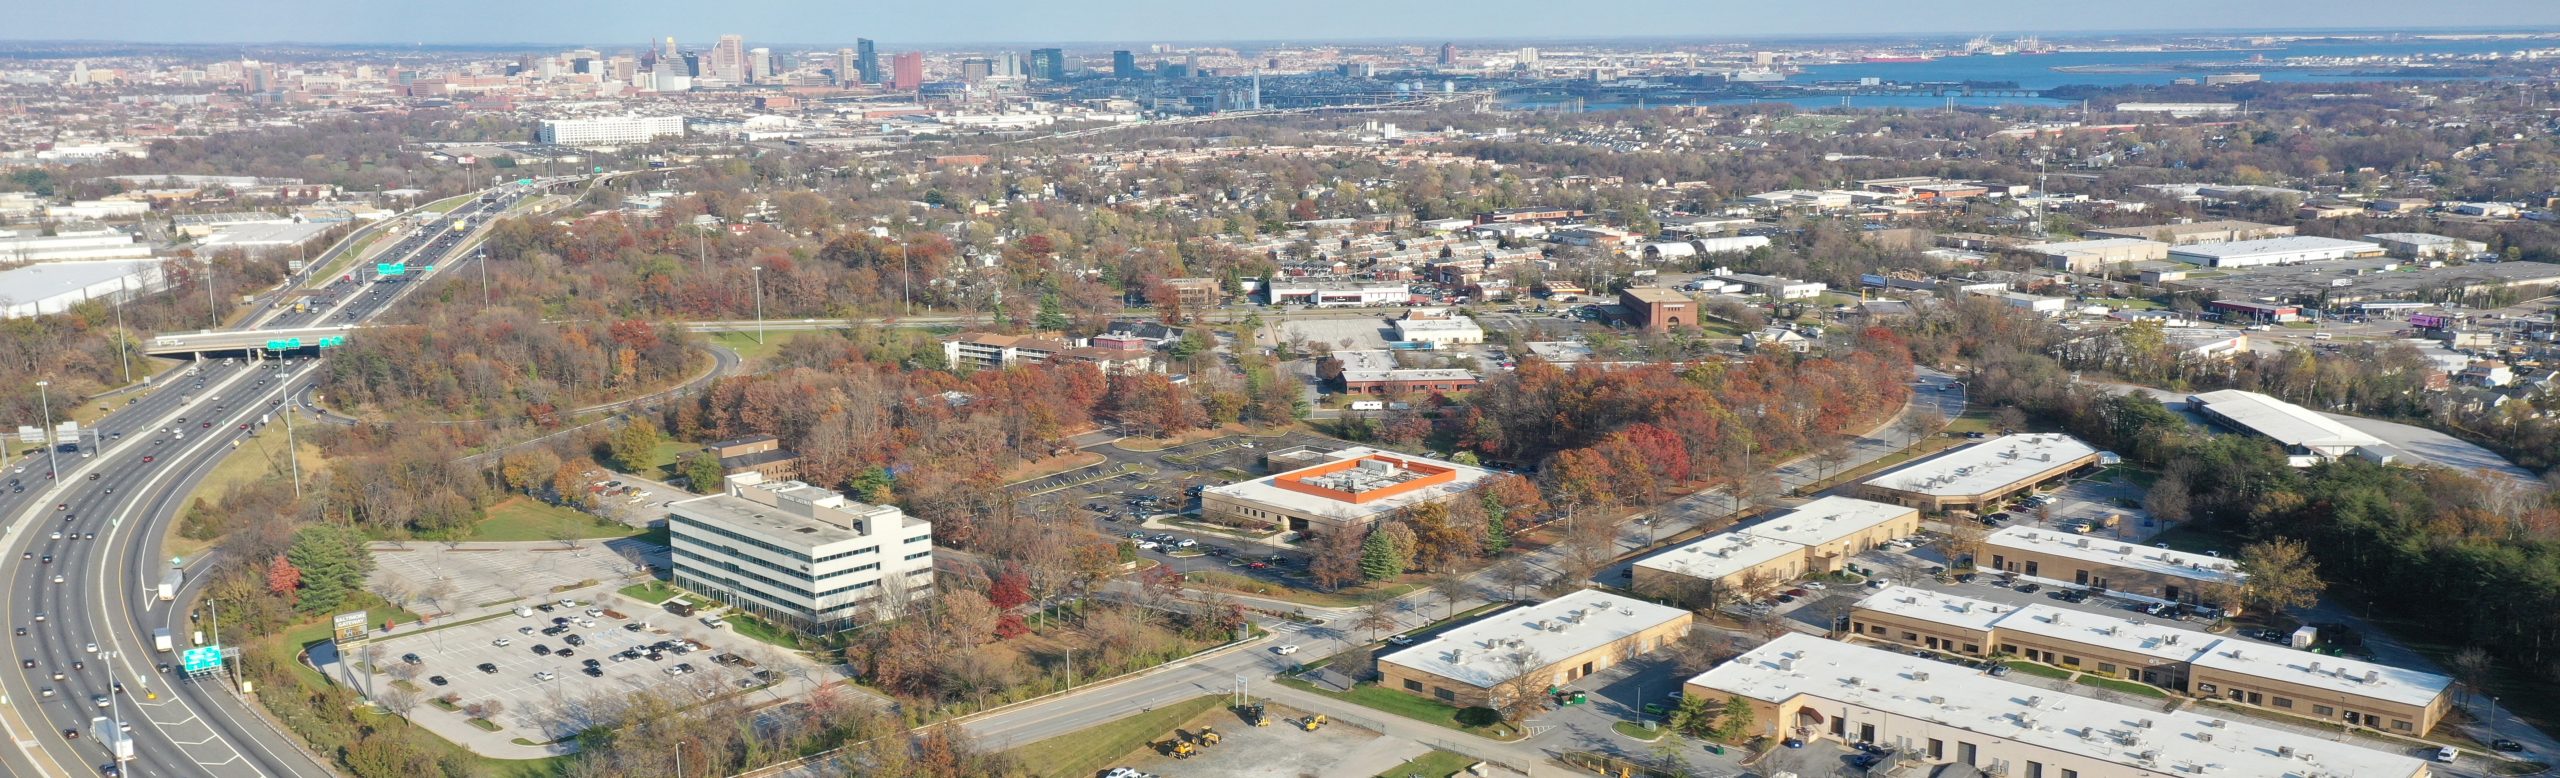 Baltimore Gateway offers an unbeatable location – just one mile from I-95 and only two miles from I-695.  